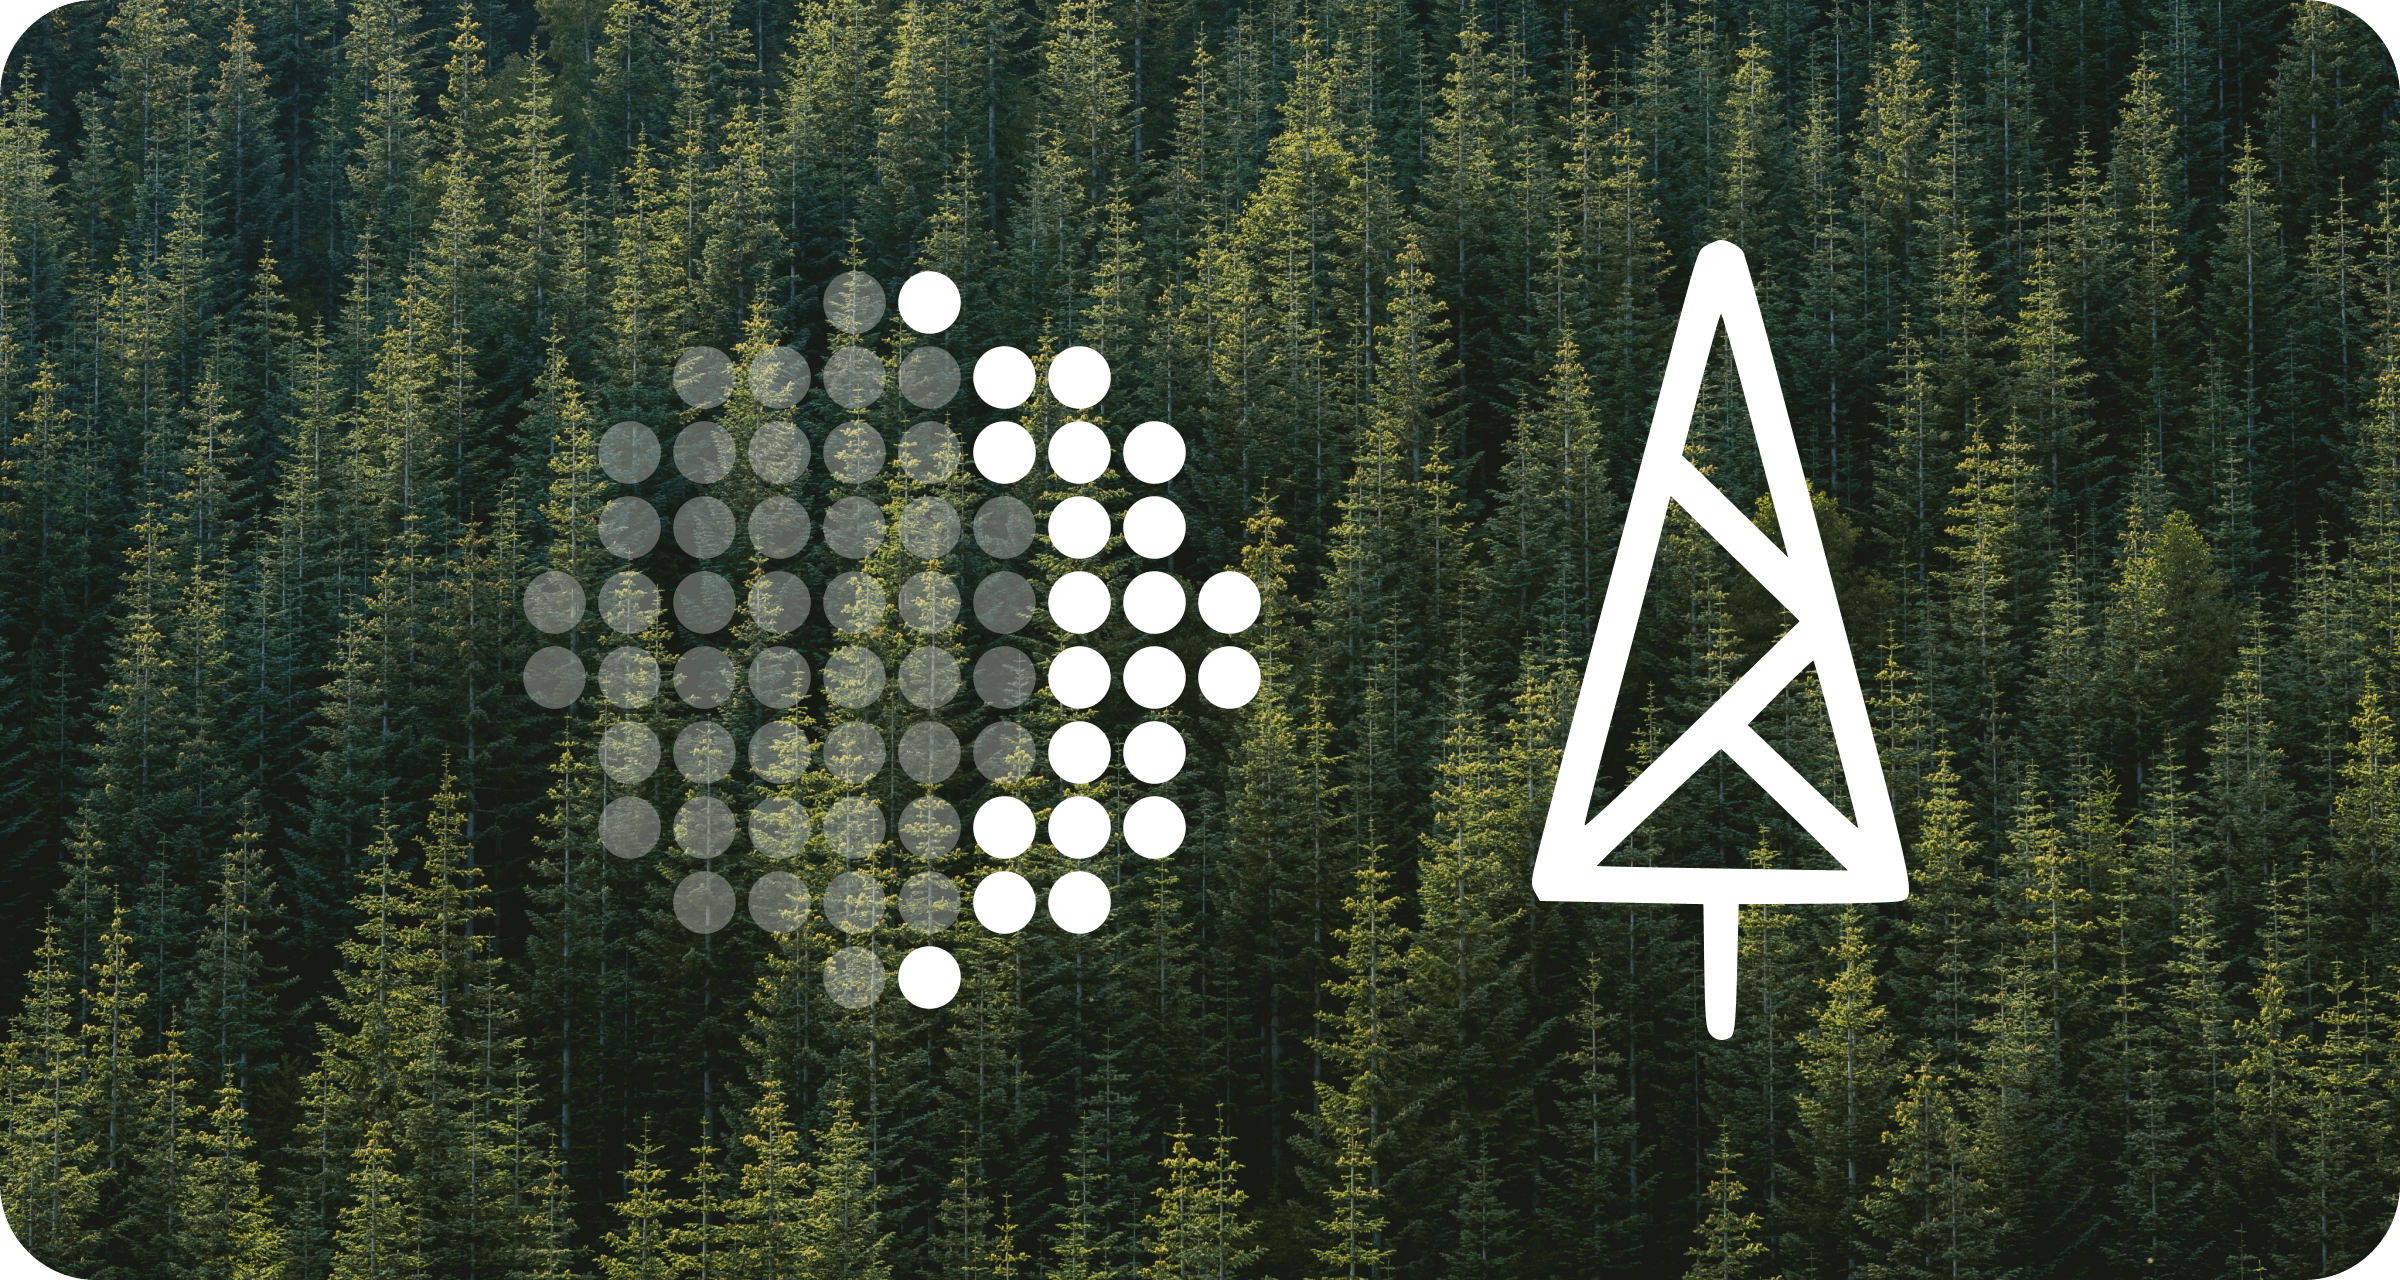 Lune and Treeconomy logos side by side, with a photo of a forest in the background